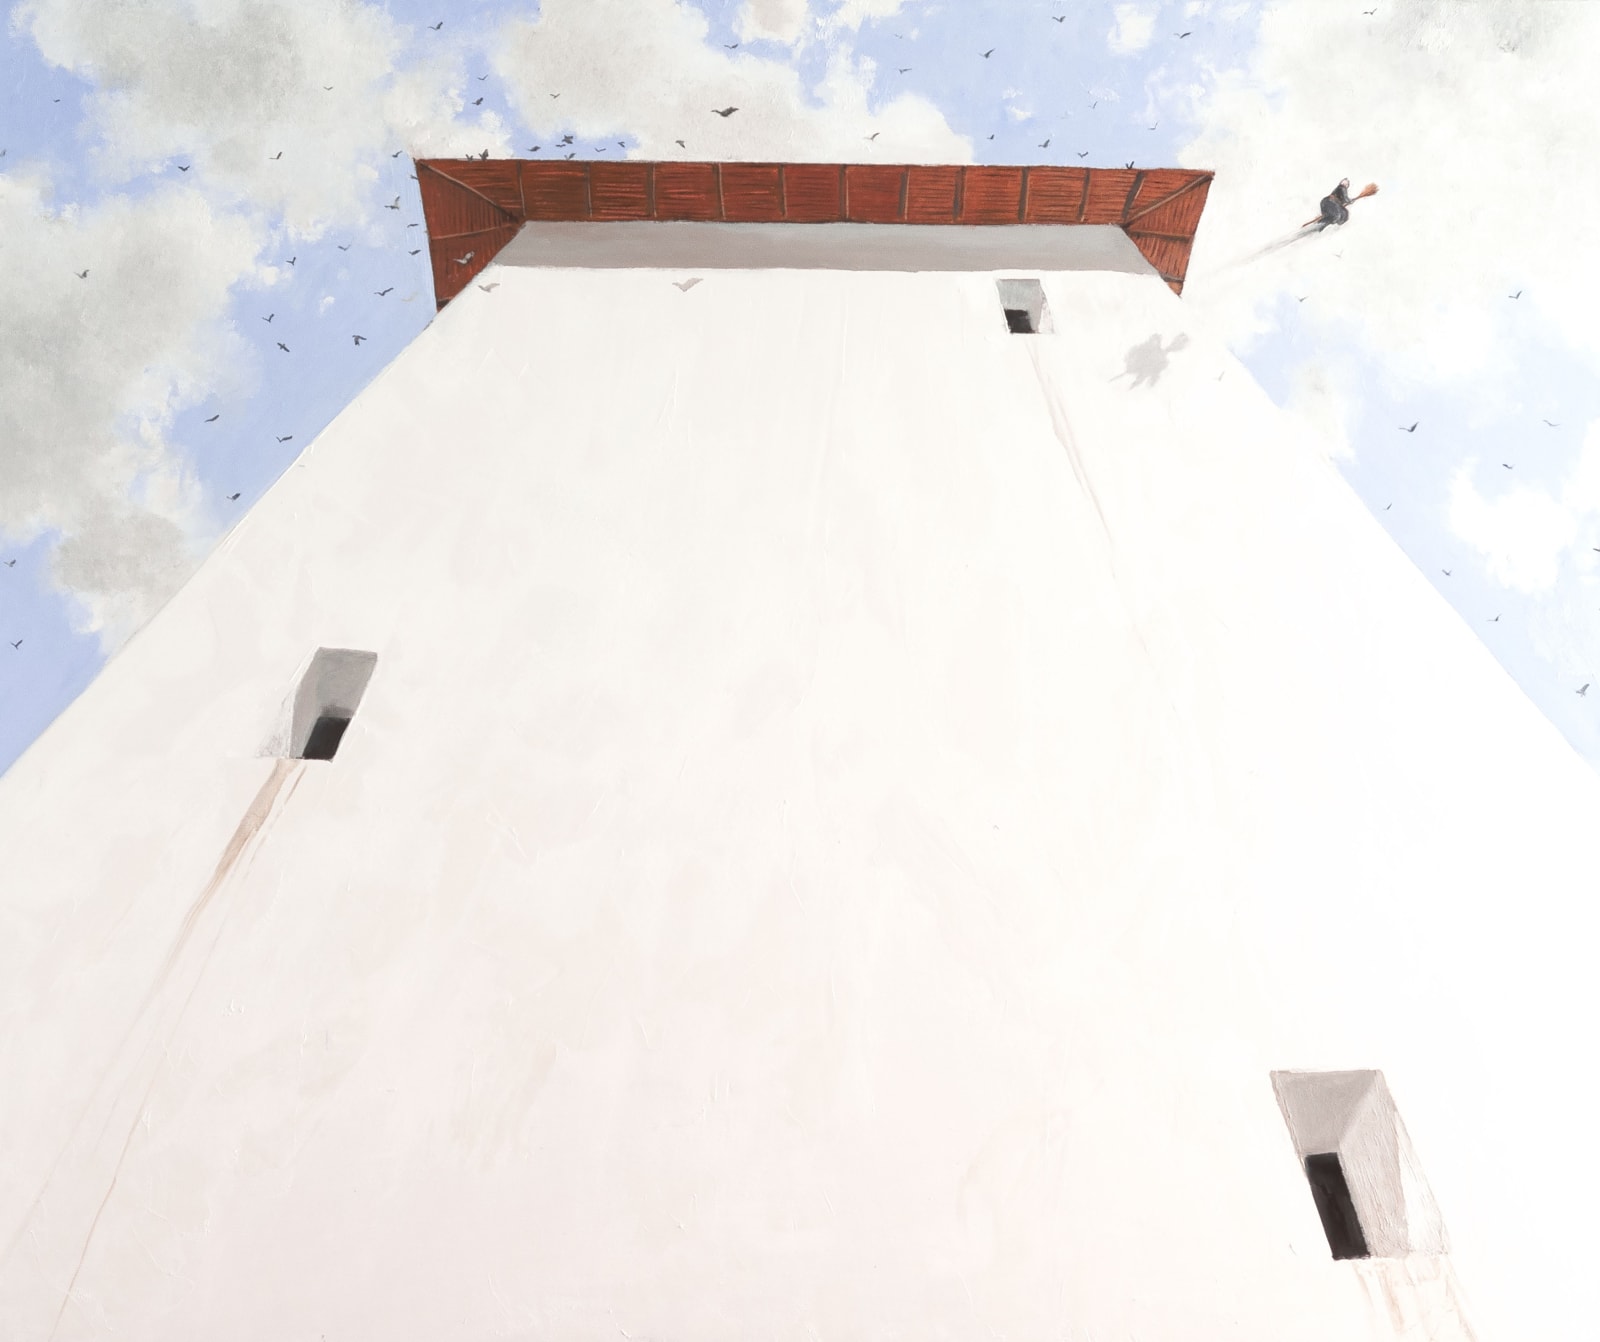 Julio Larraz, In The Eyes of a Child, 2015